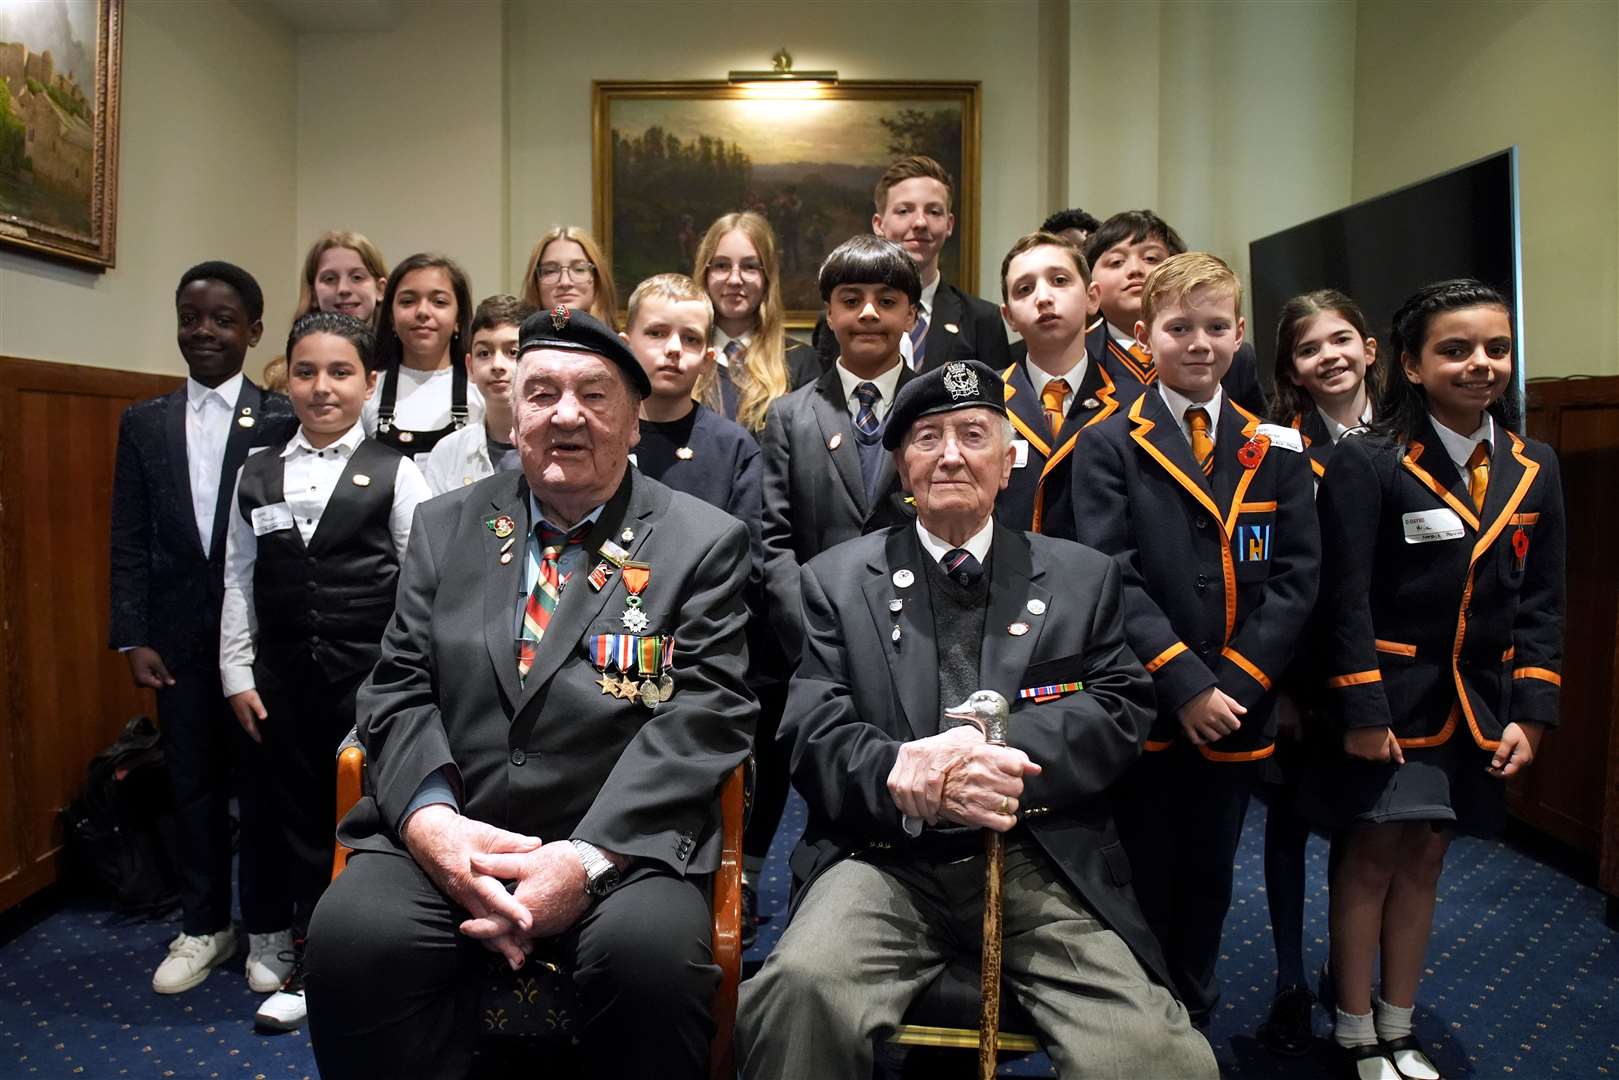 D-Day veterans Richard Aldred (left), 99, and Stan Ford, 98, meeting school children at the Union Jack Club in London (Gareth Fuller/PA)